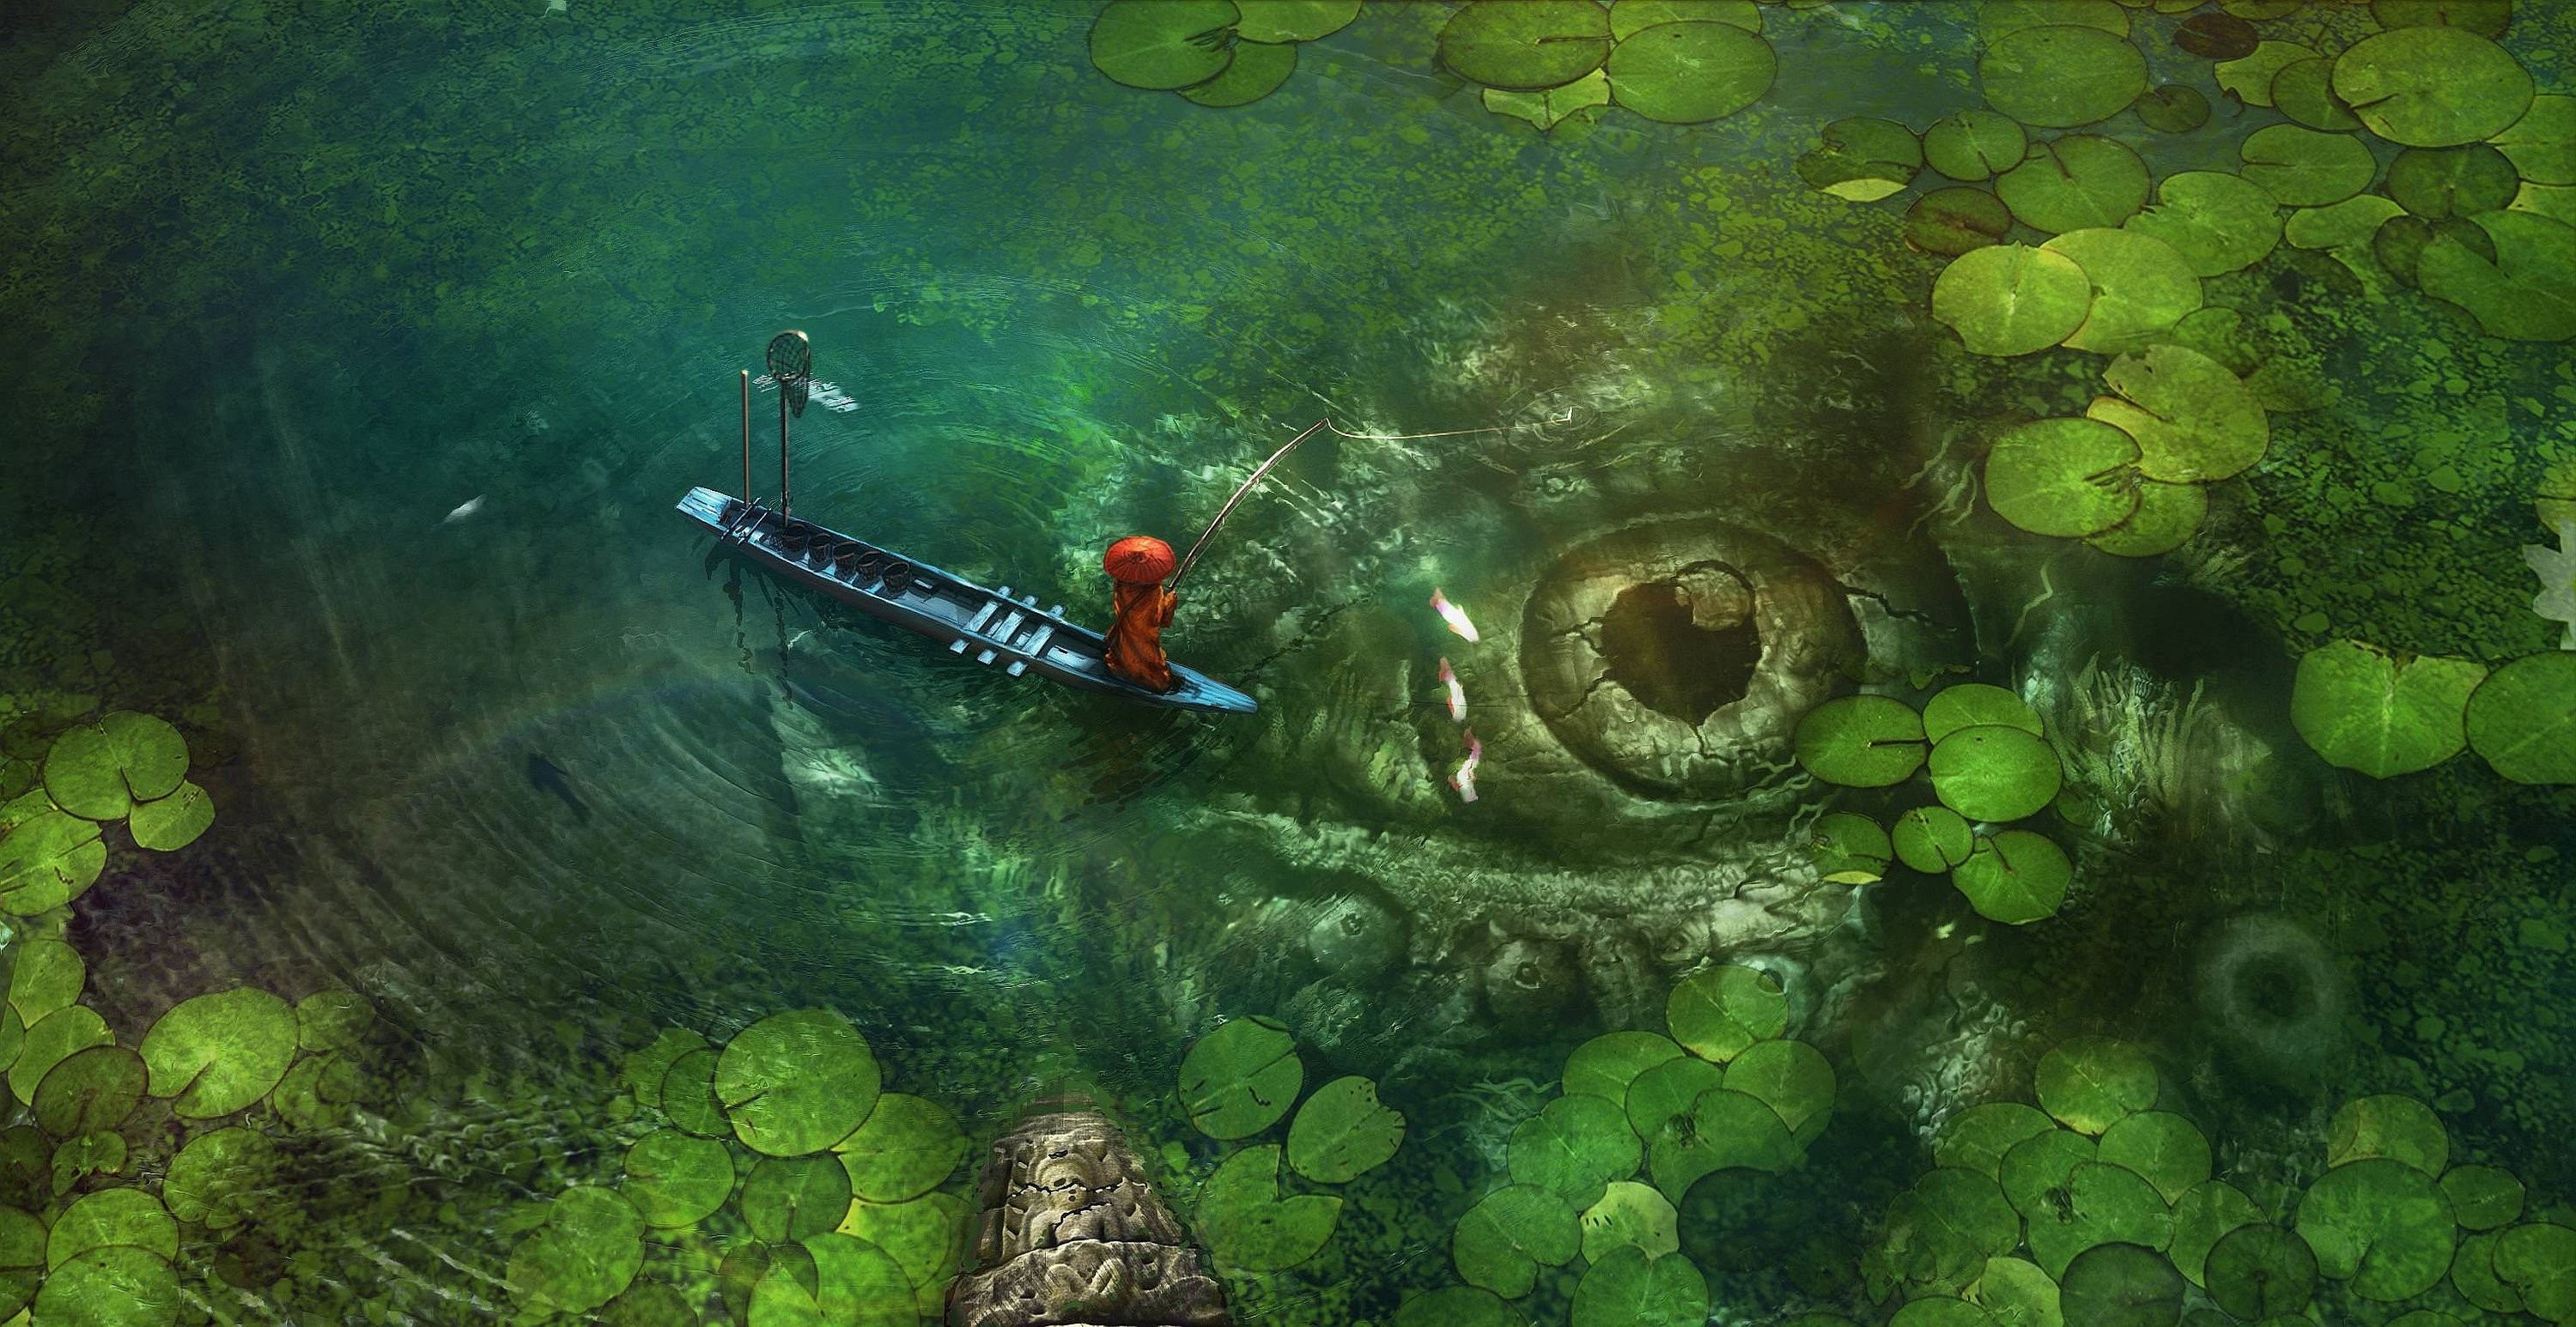 Monster Lake Fantasy Red Green Fish Wallpaper At Fantasy - Beauty In Unexpected Places - HD Wallpaper 